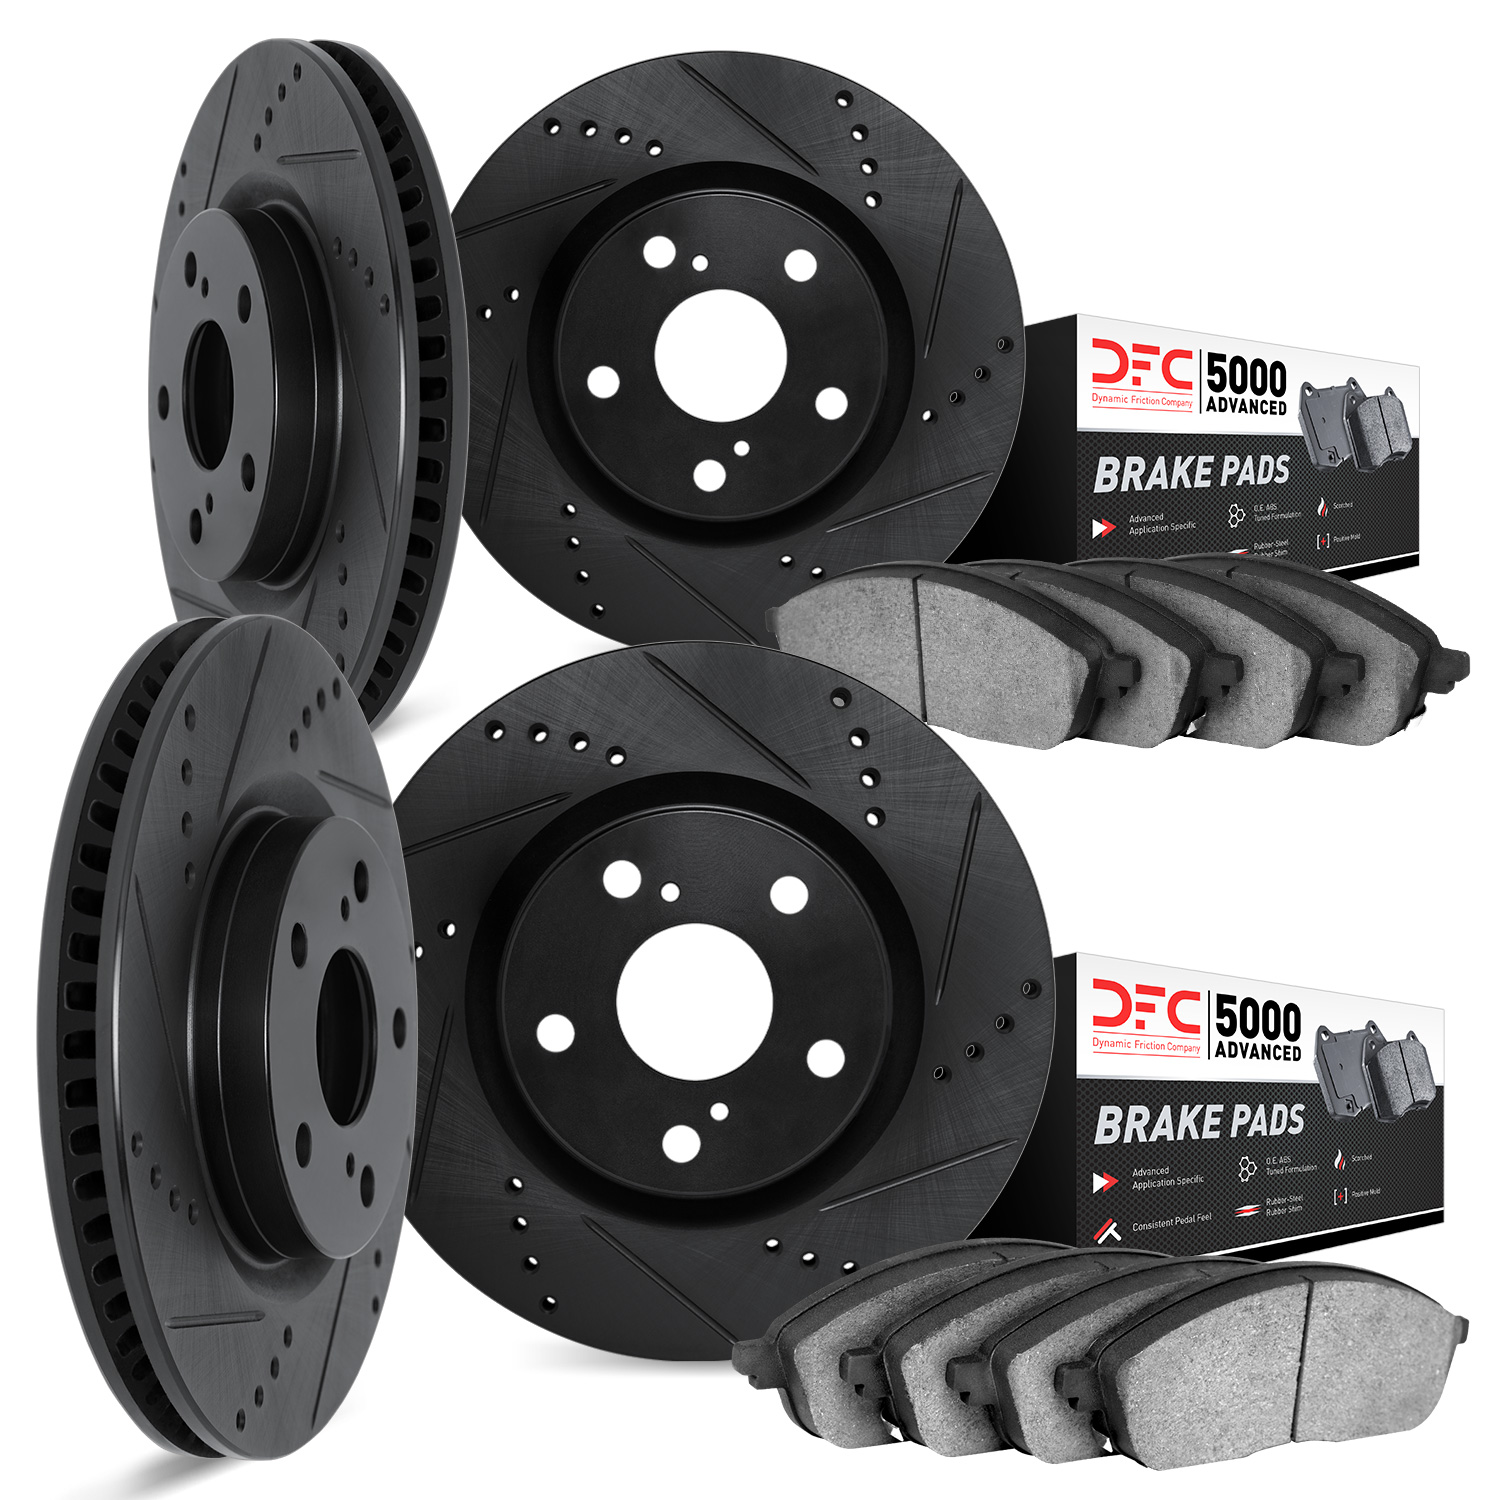 8504-27013 Drilled/Slotted Brake Rotors w/5000 Advanced Brake Pads Kit [Black], 2017-2019 Volvo, Position: Front and Rear